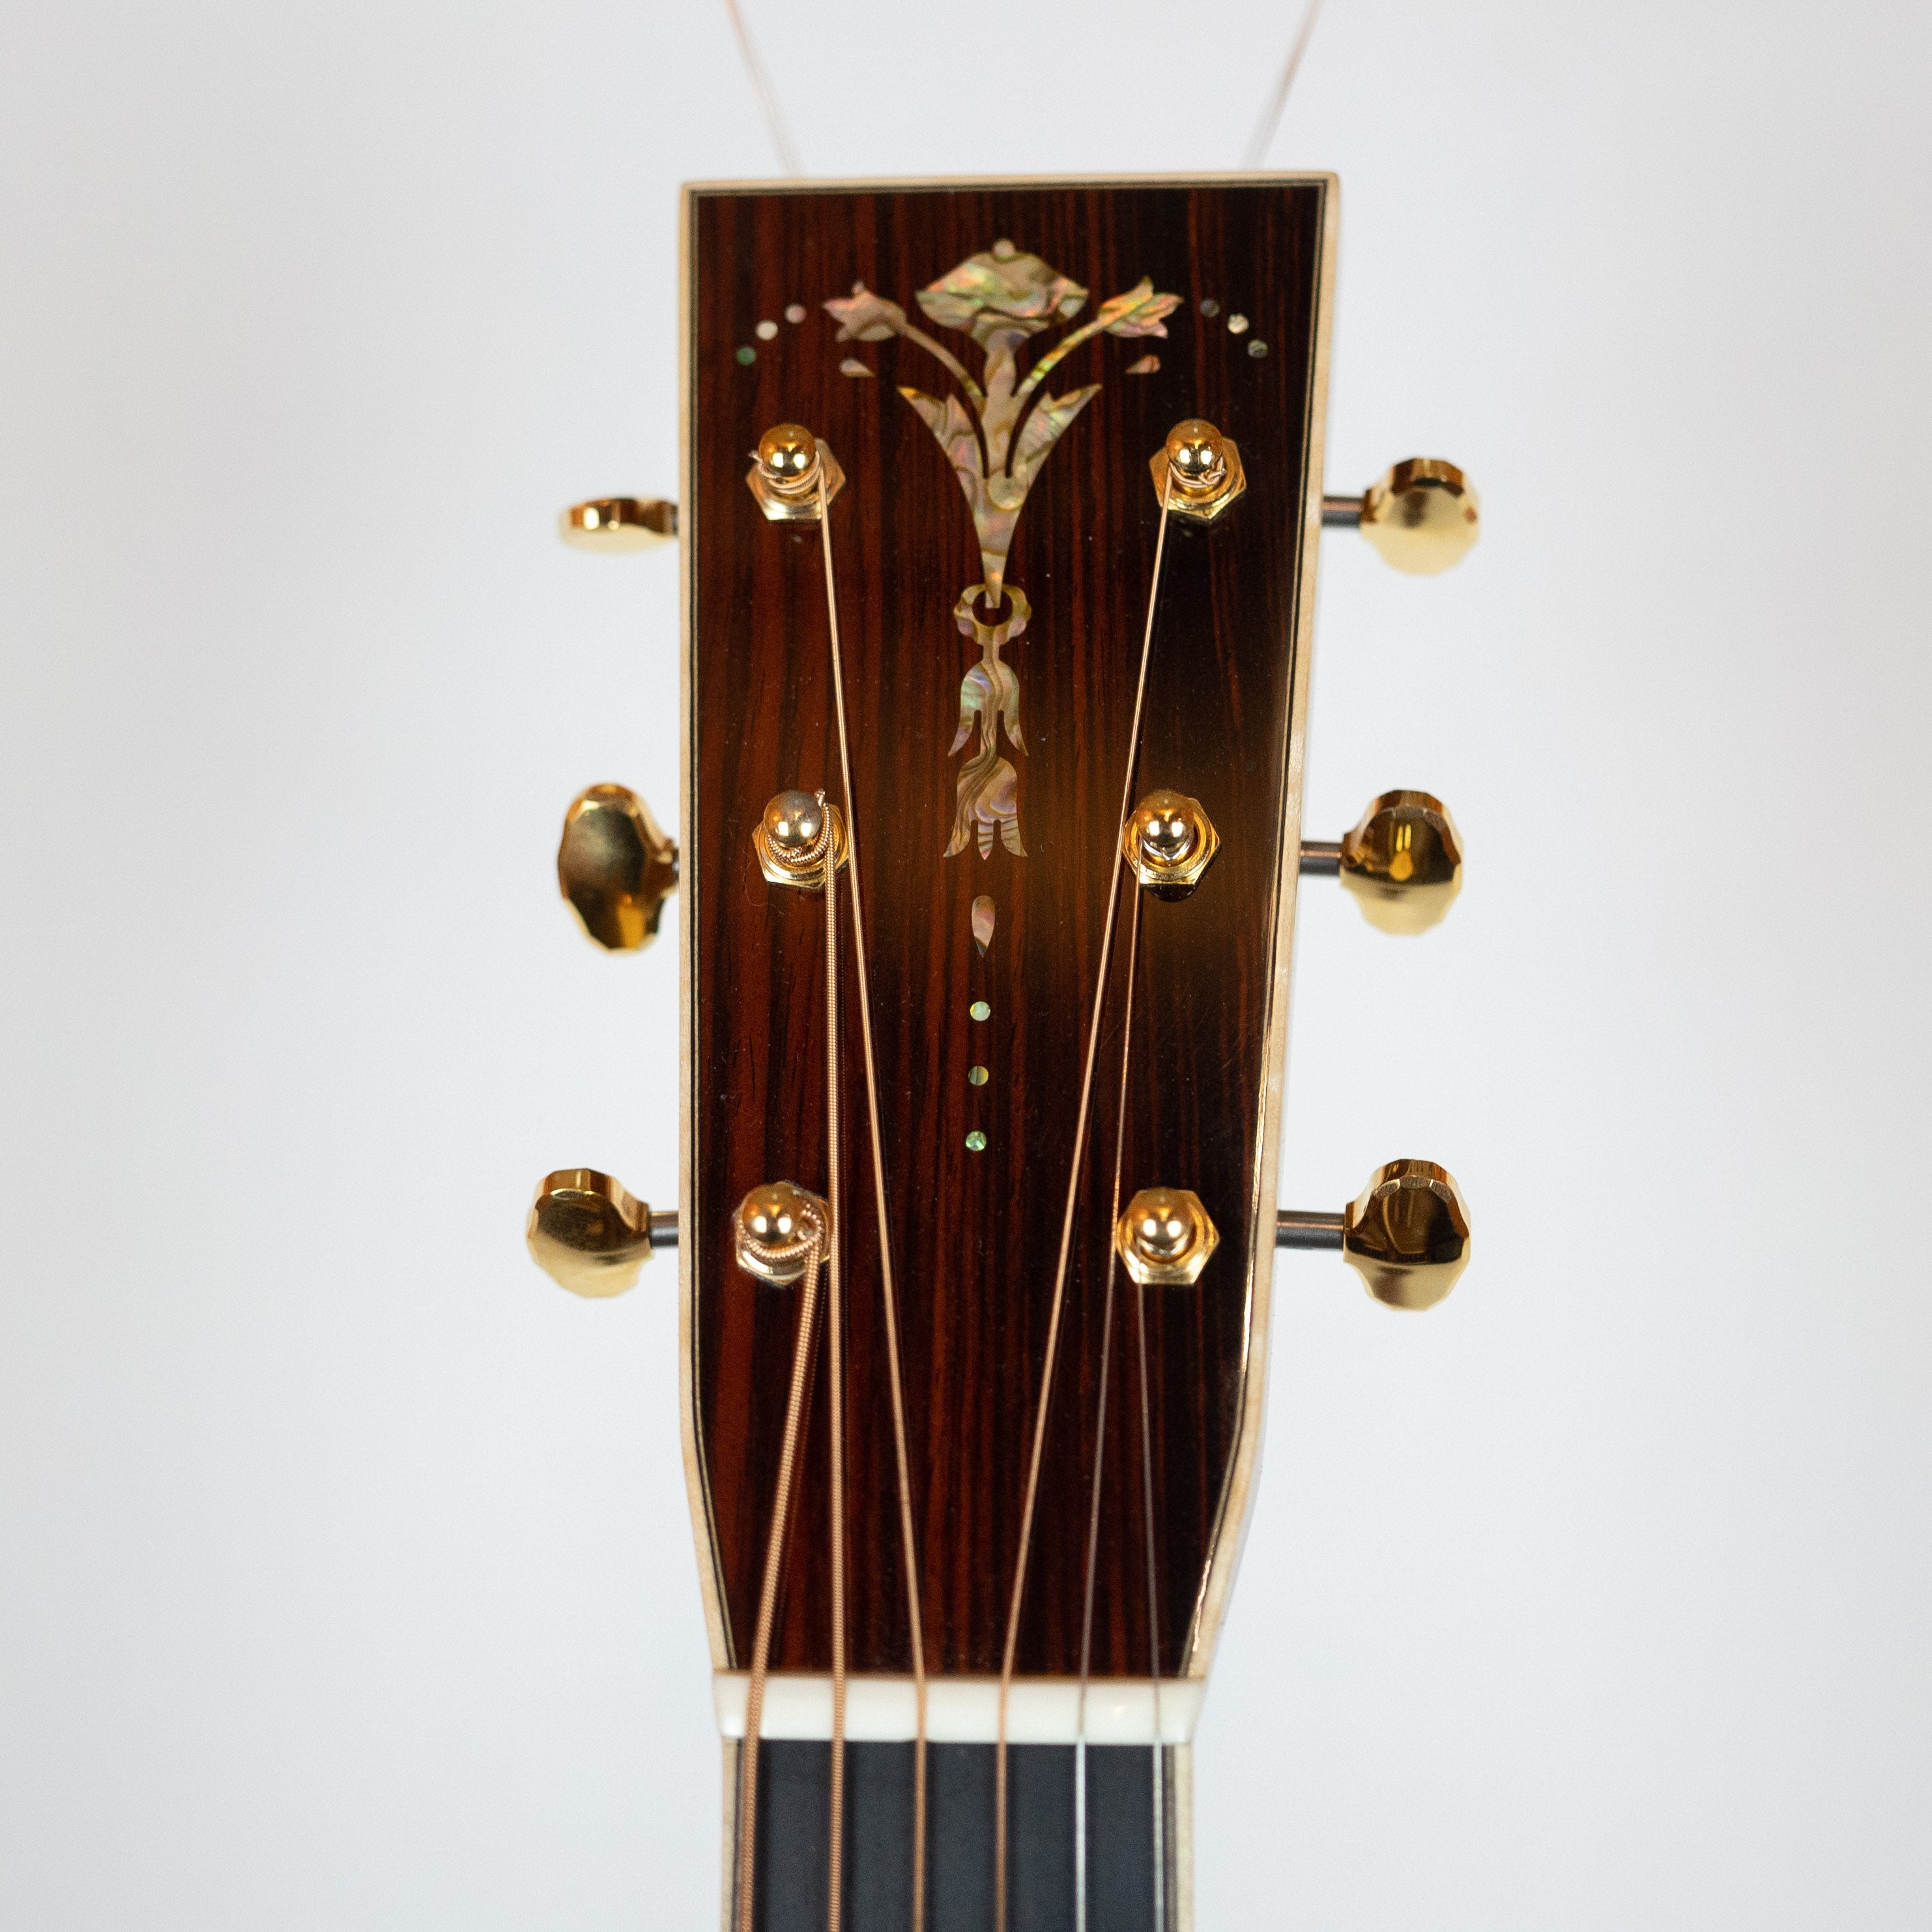 Martin 2018 Rudy's 40th Anniversary OM Cocobolo #6 (signed by Rudy and Chris Martin)